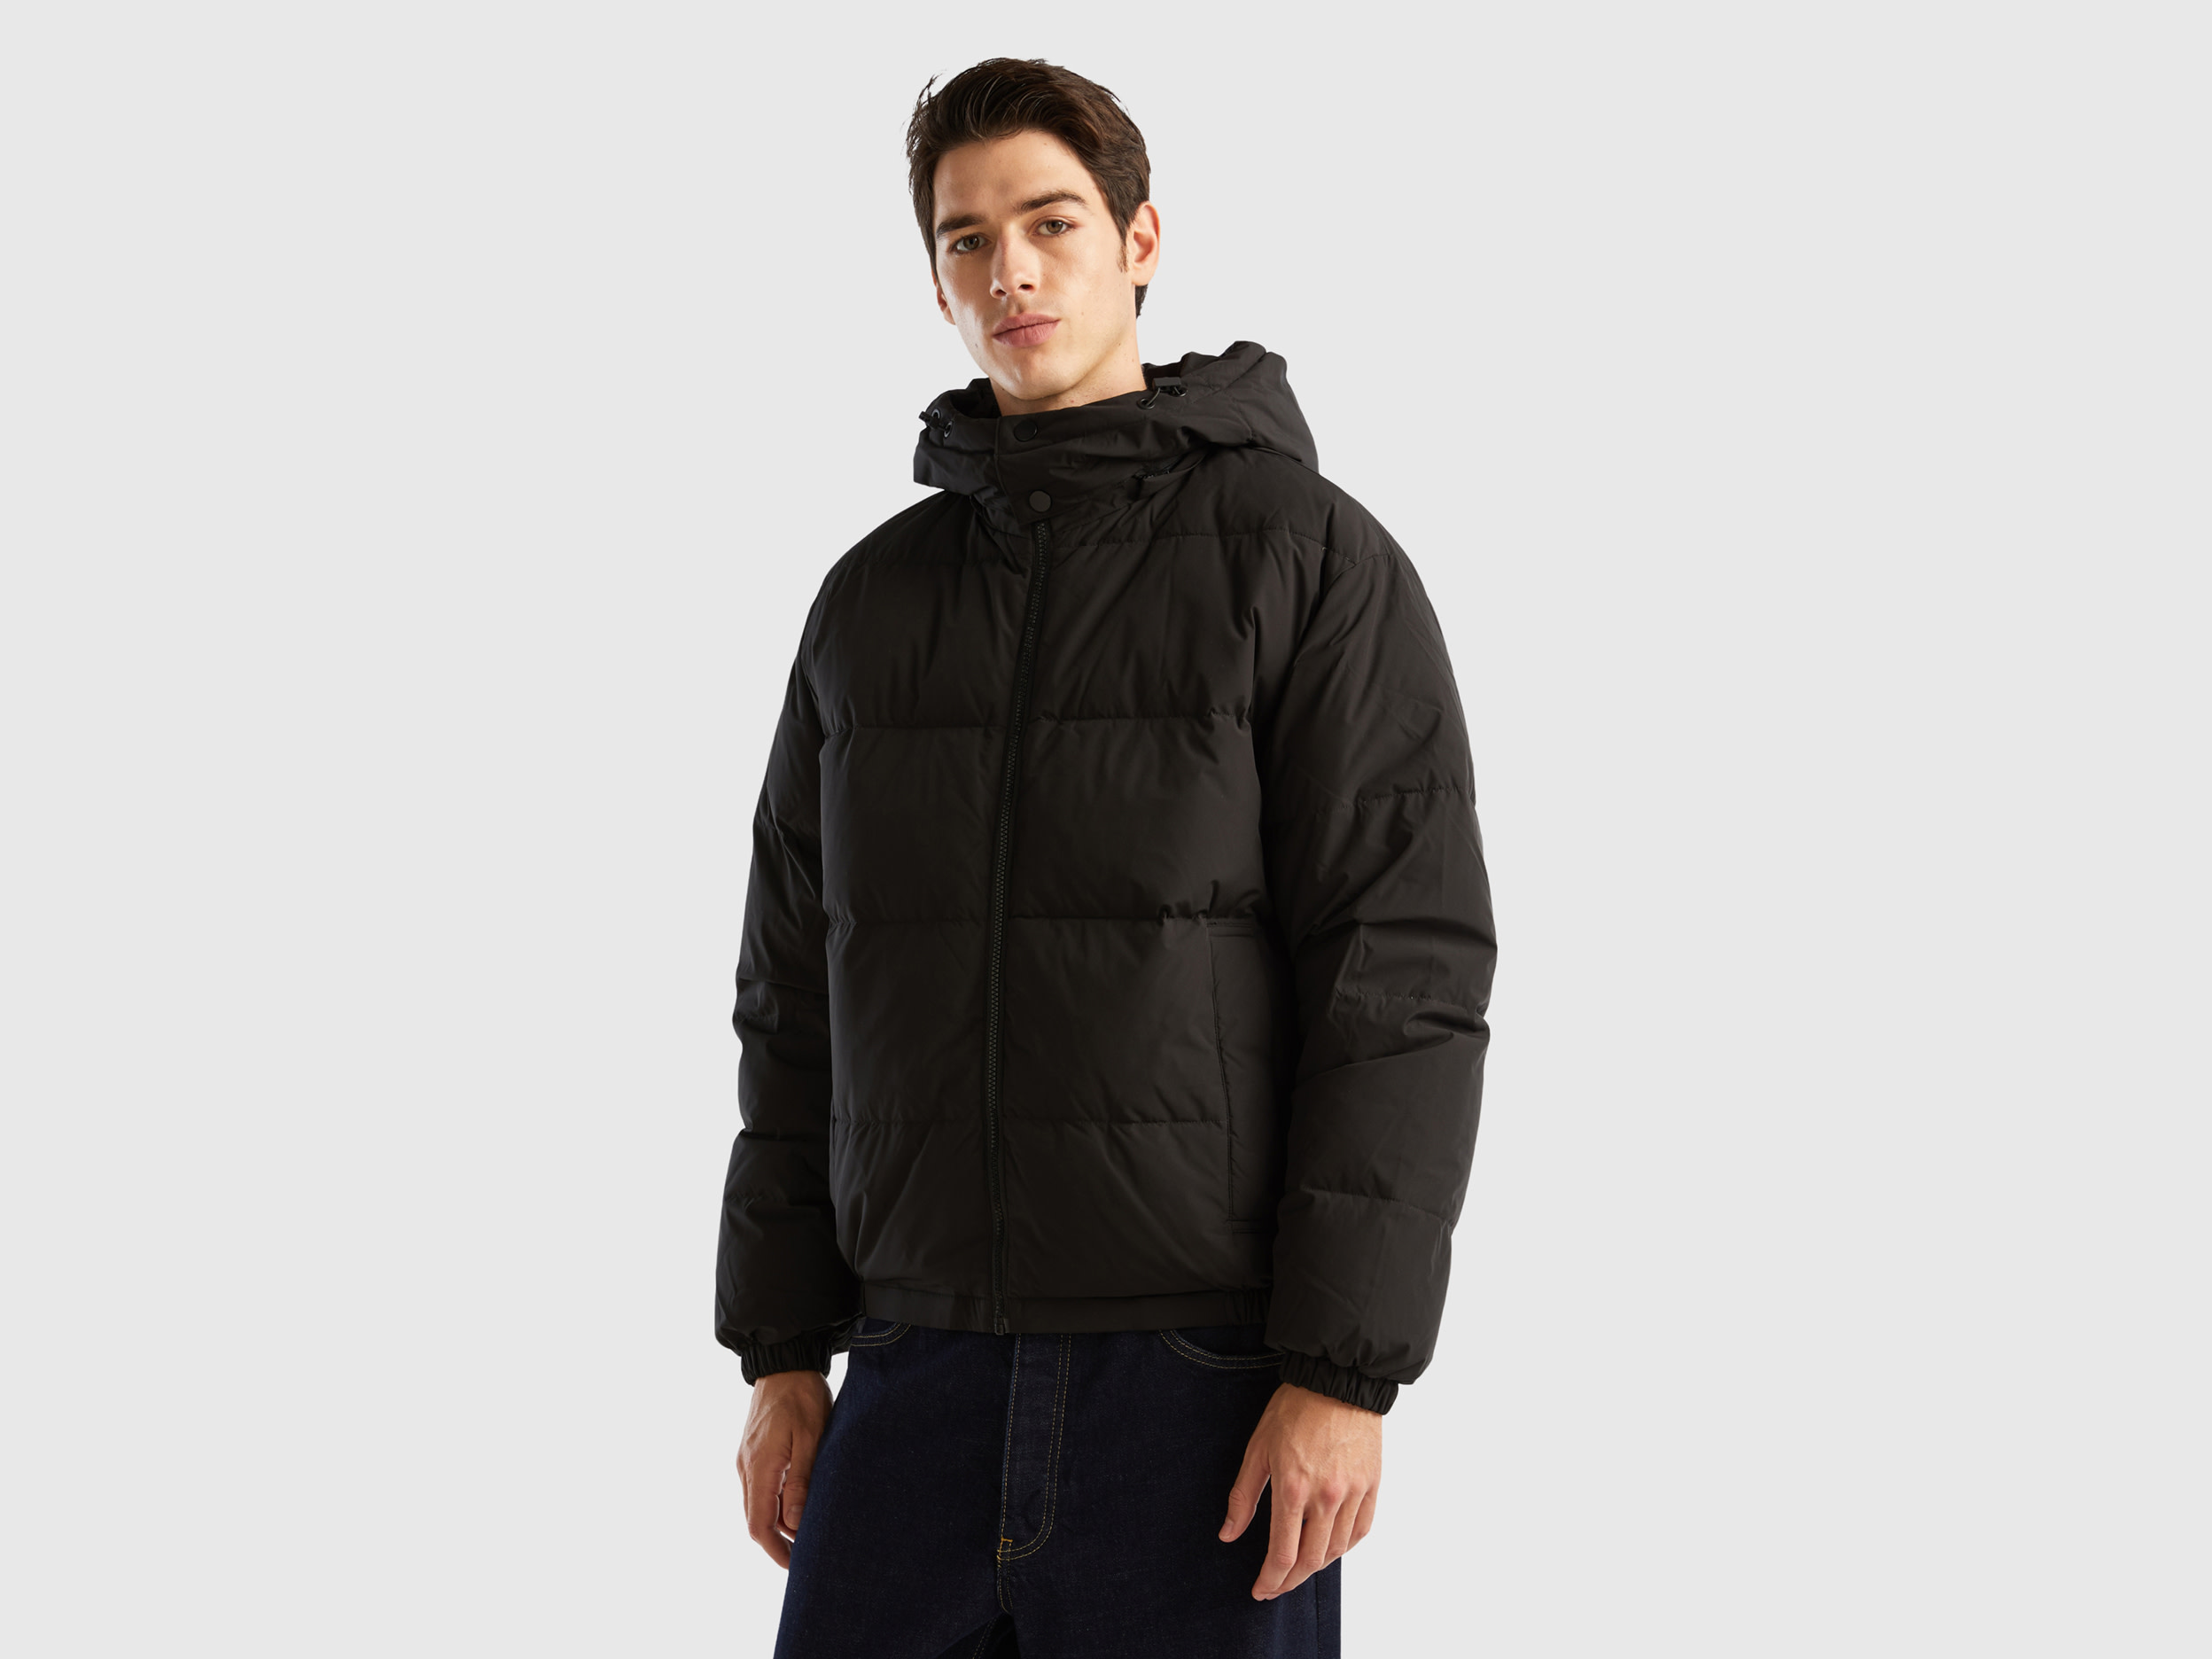 Benetton, Padded Jacket With Removable Hood, size S, Black, Men